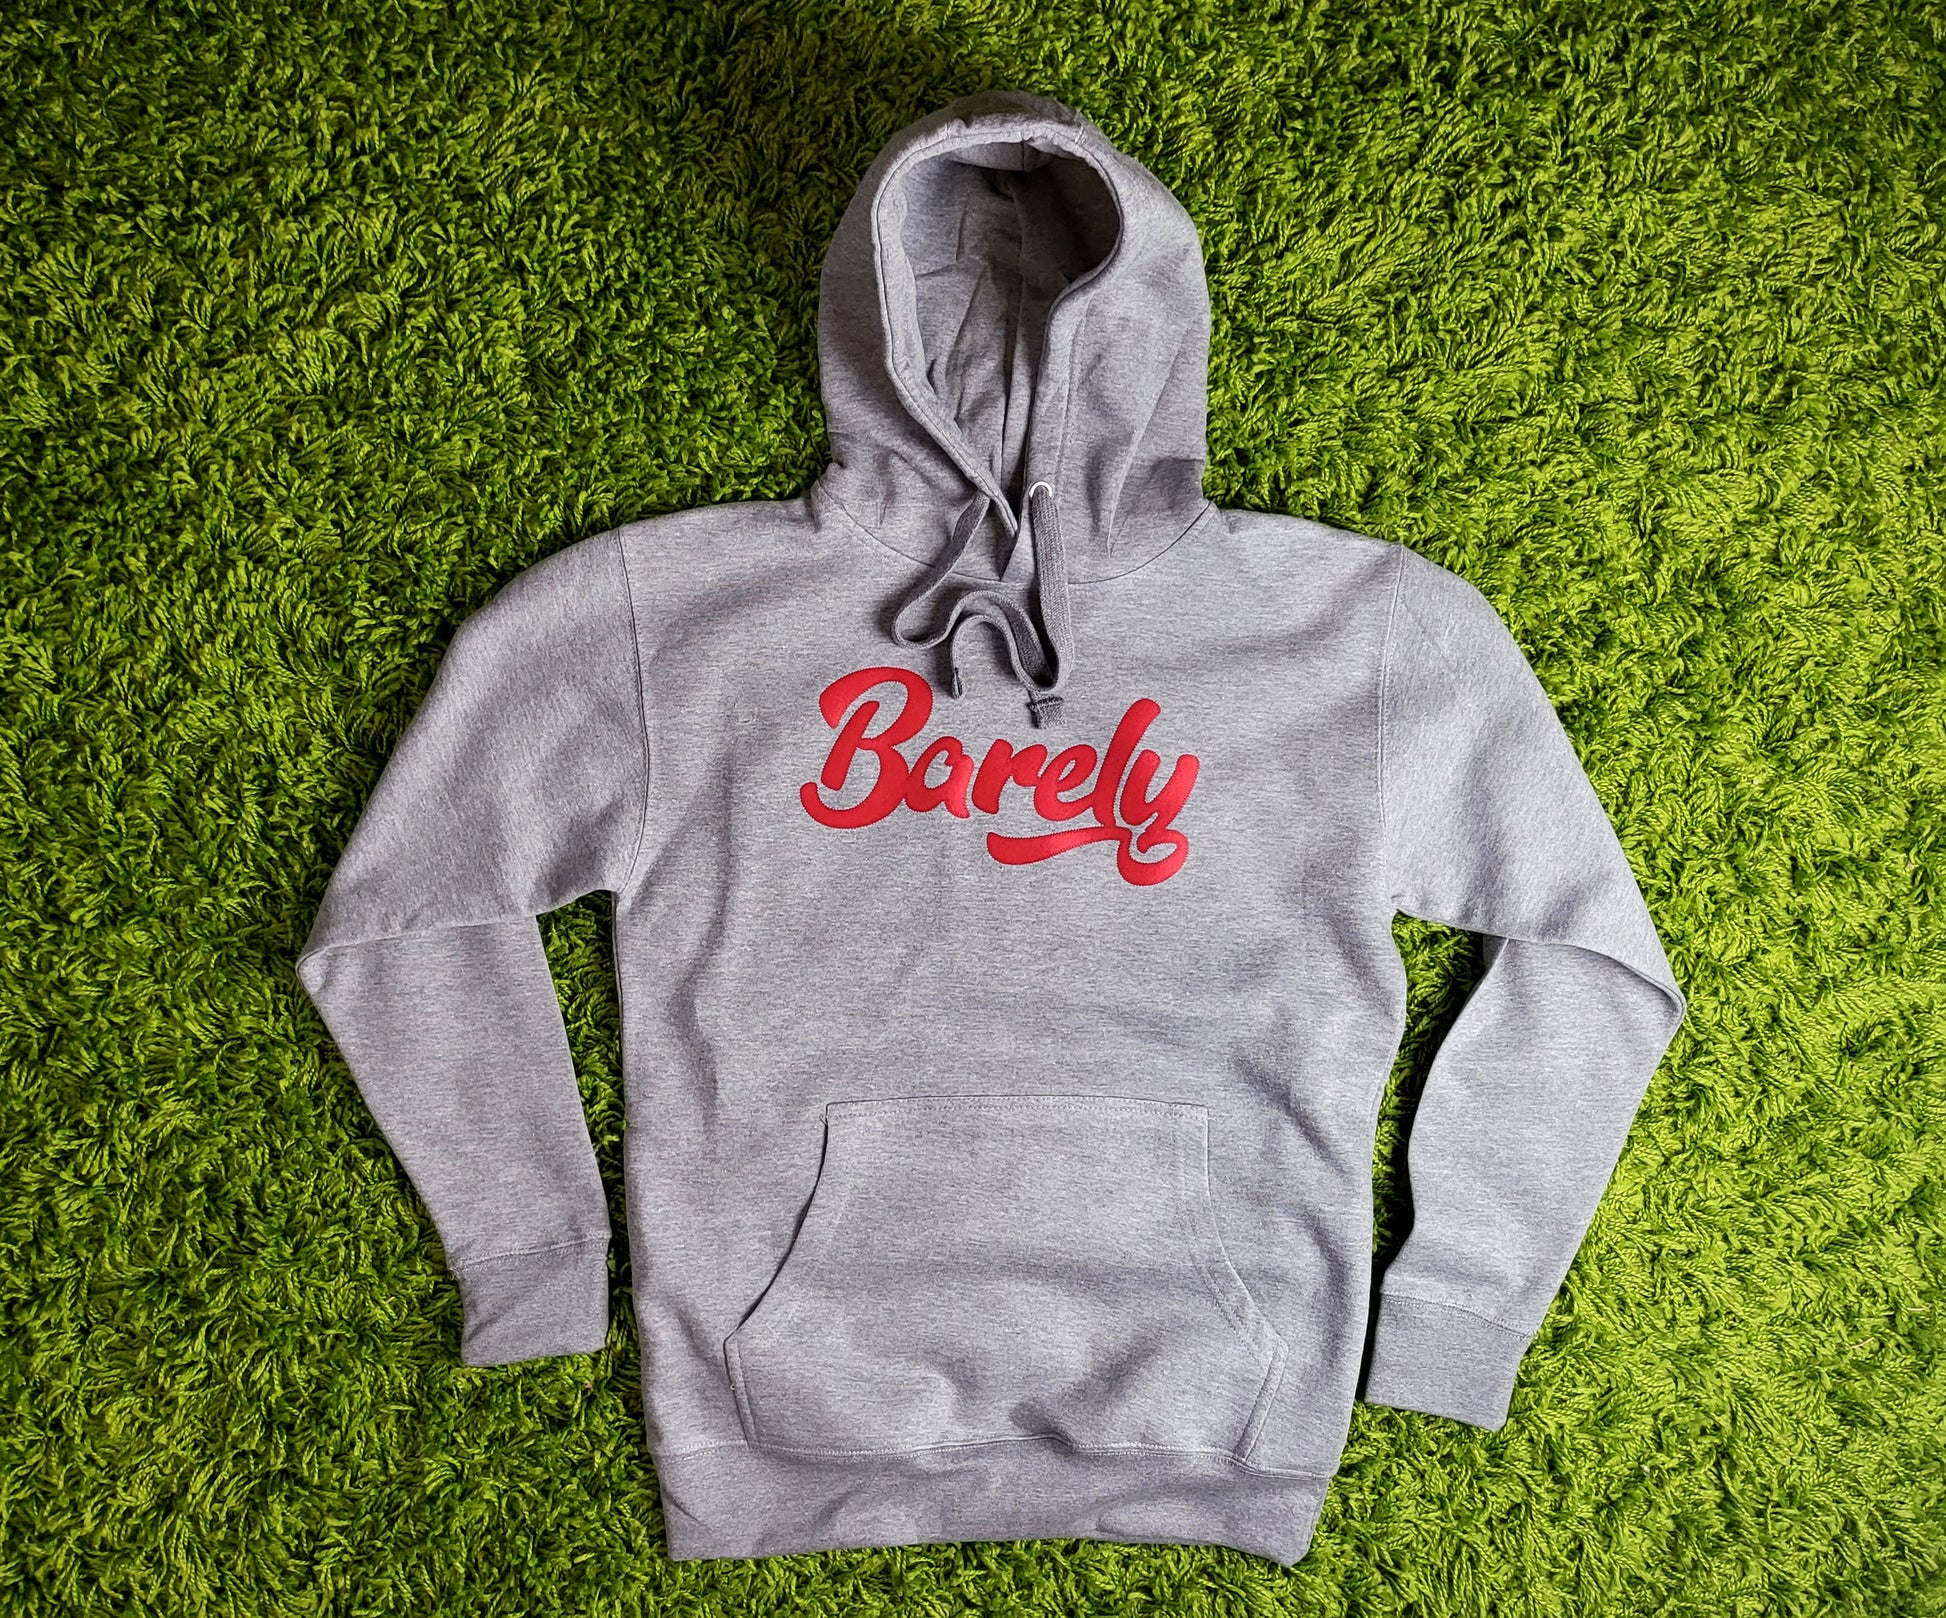 Barely "Script" Logo Hoodie (Gry/Red) - Barely Ordinary